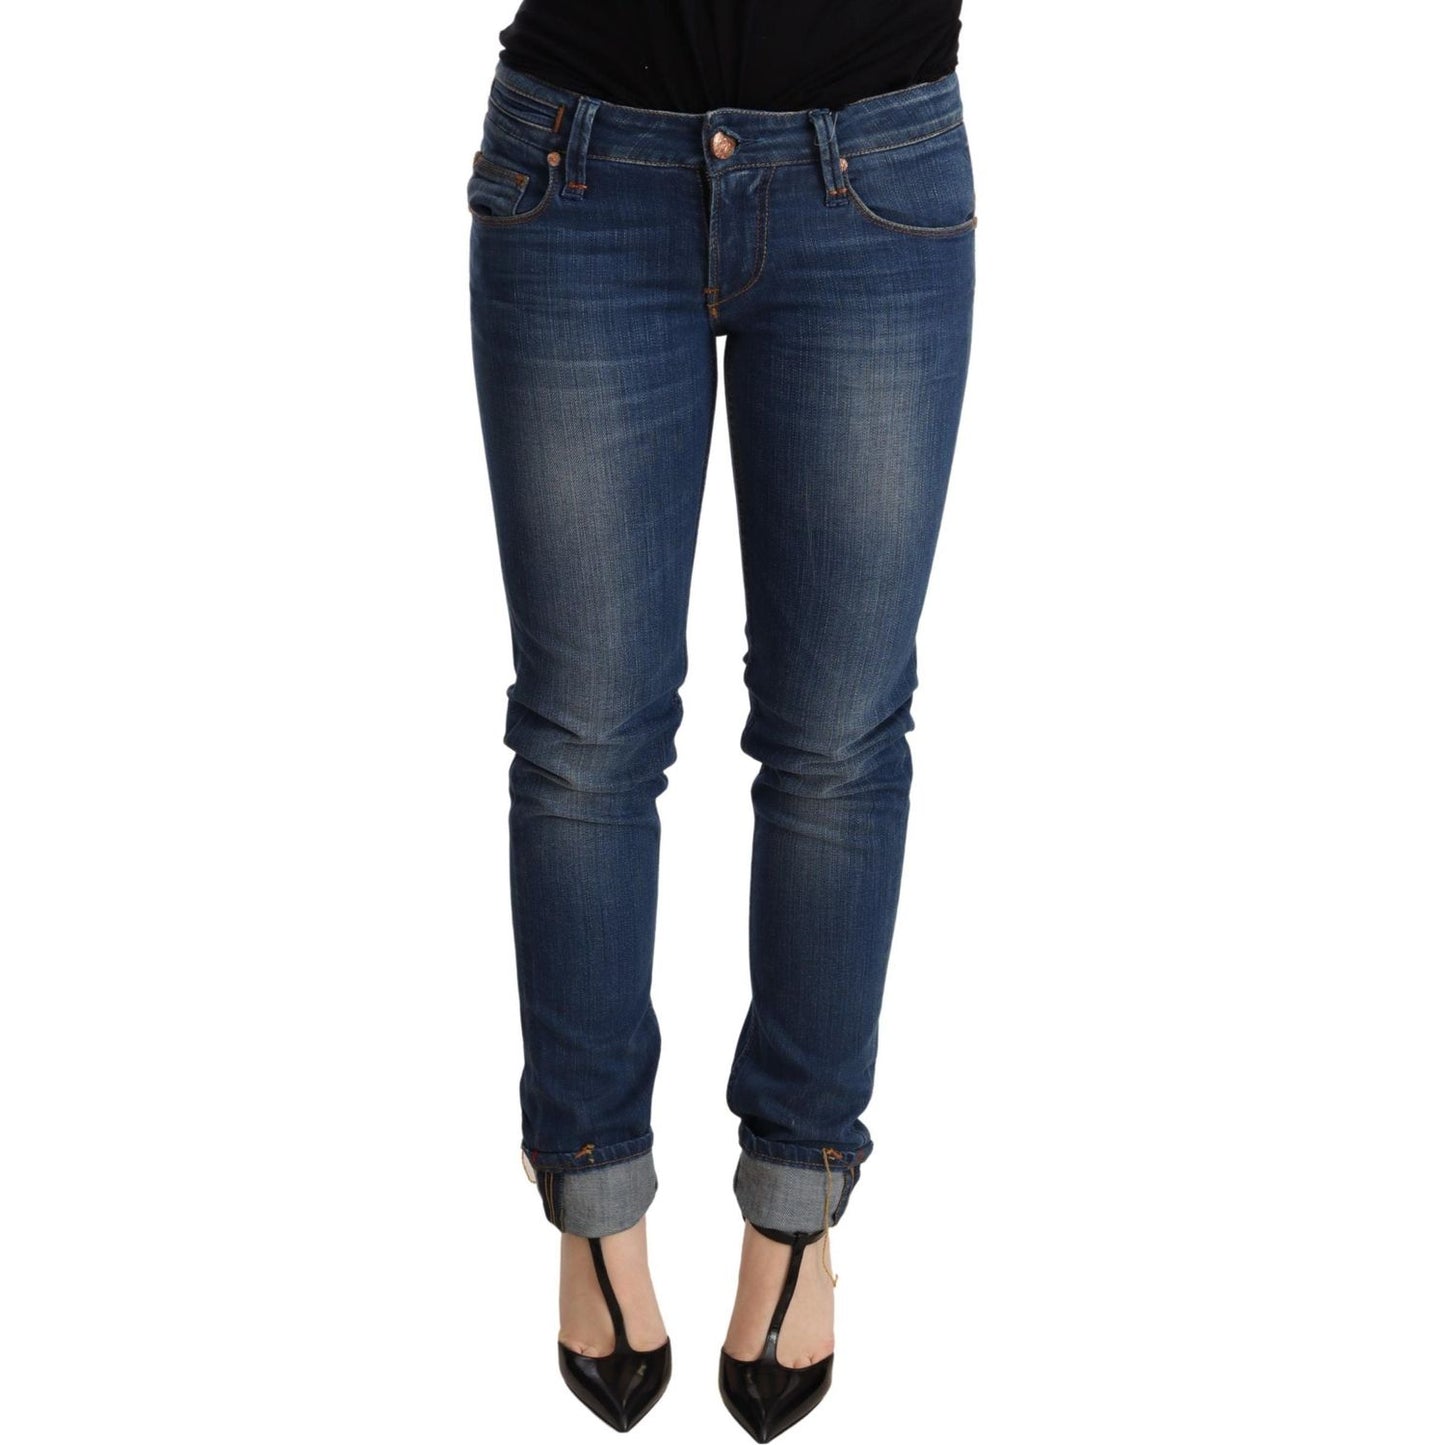 Acht Chic Blue Washed Push-Up Skinny Jeans Jeans & Pants blue-washed-low-waist-skinny-denim-jeans-pant